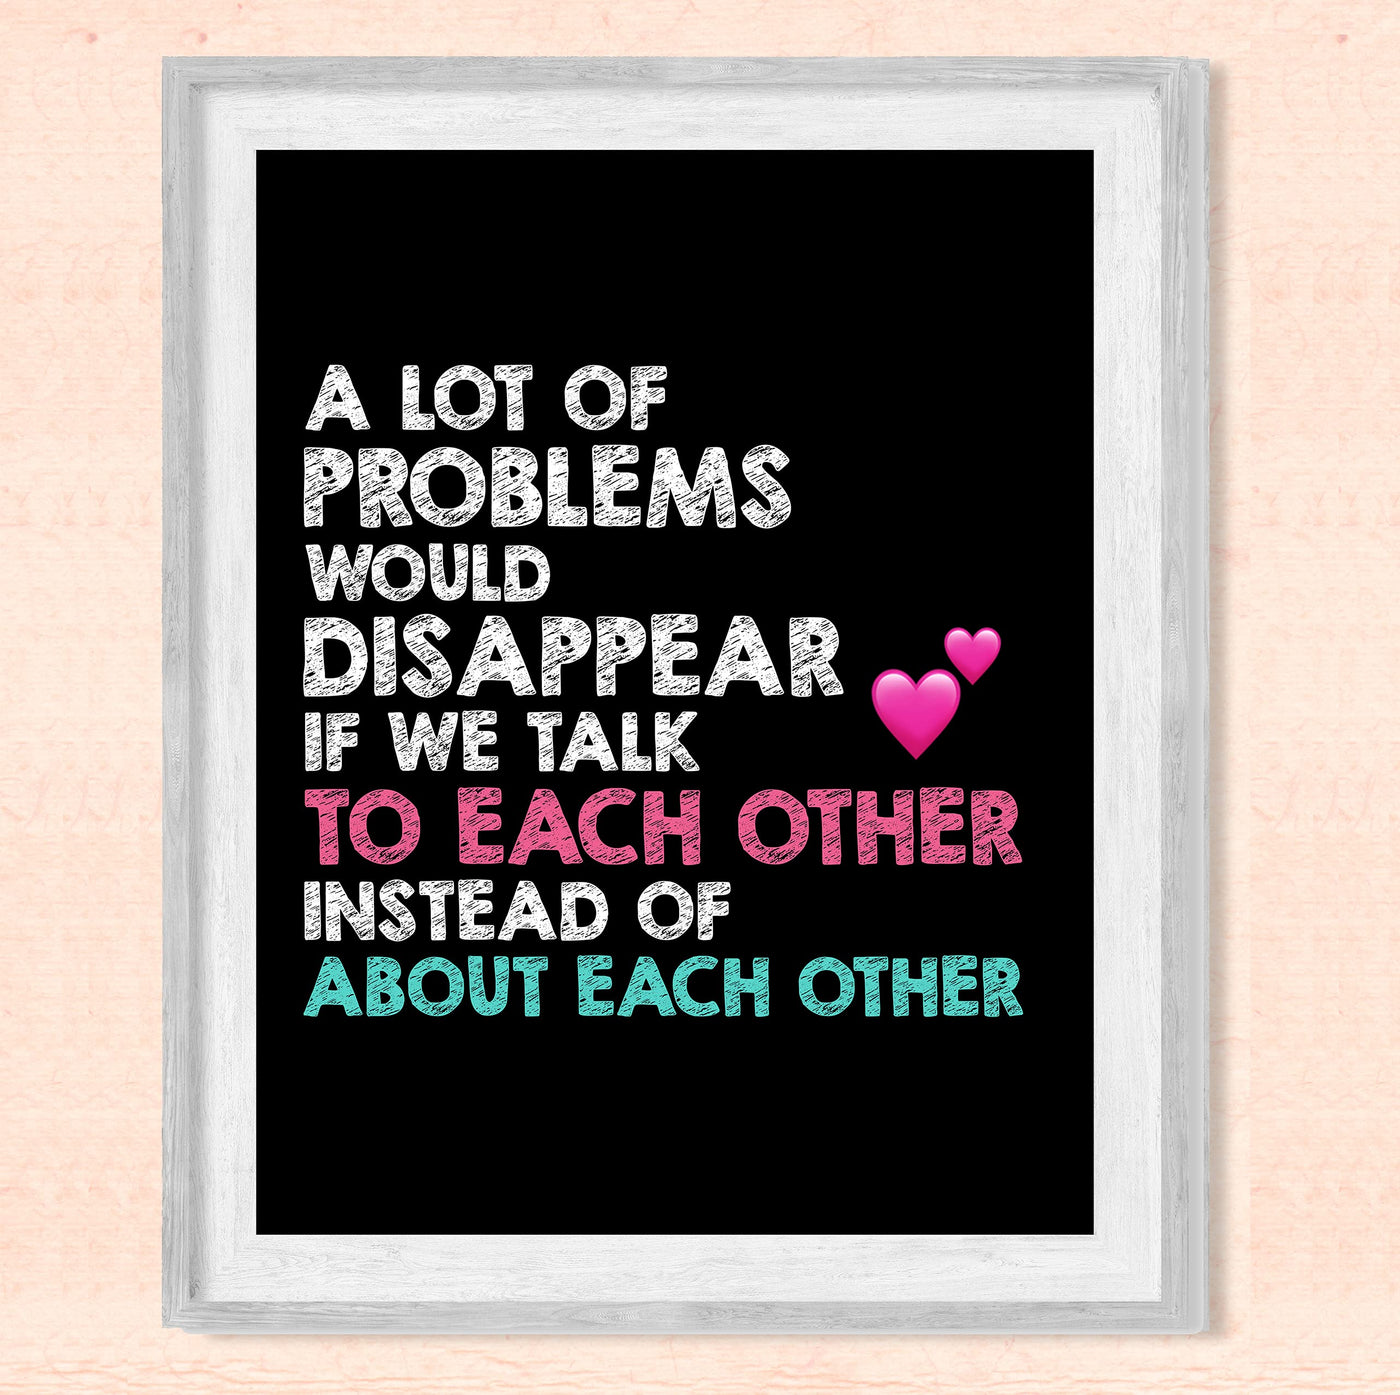 A Lot of Problems Would Disappear If We Talk To Each Other-Inspirational Wall Decor-8 x 10" Typography Art Print-Ready to Frame. Motivational Home-Office-Classroom Decor. Perfect Sign for Teachers!